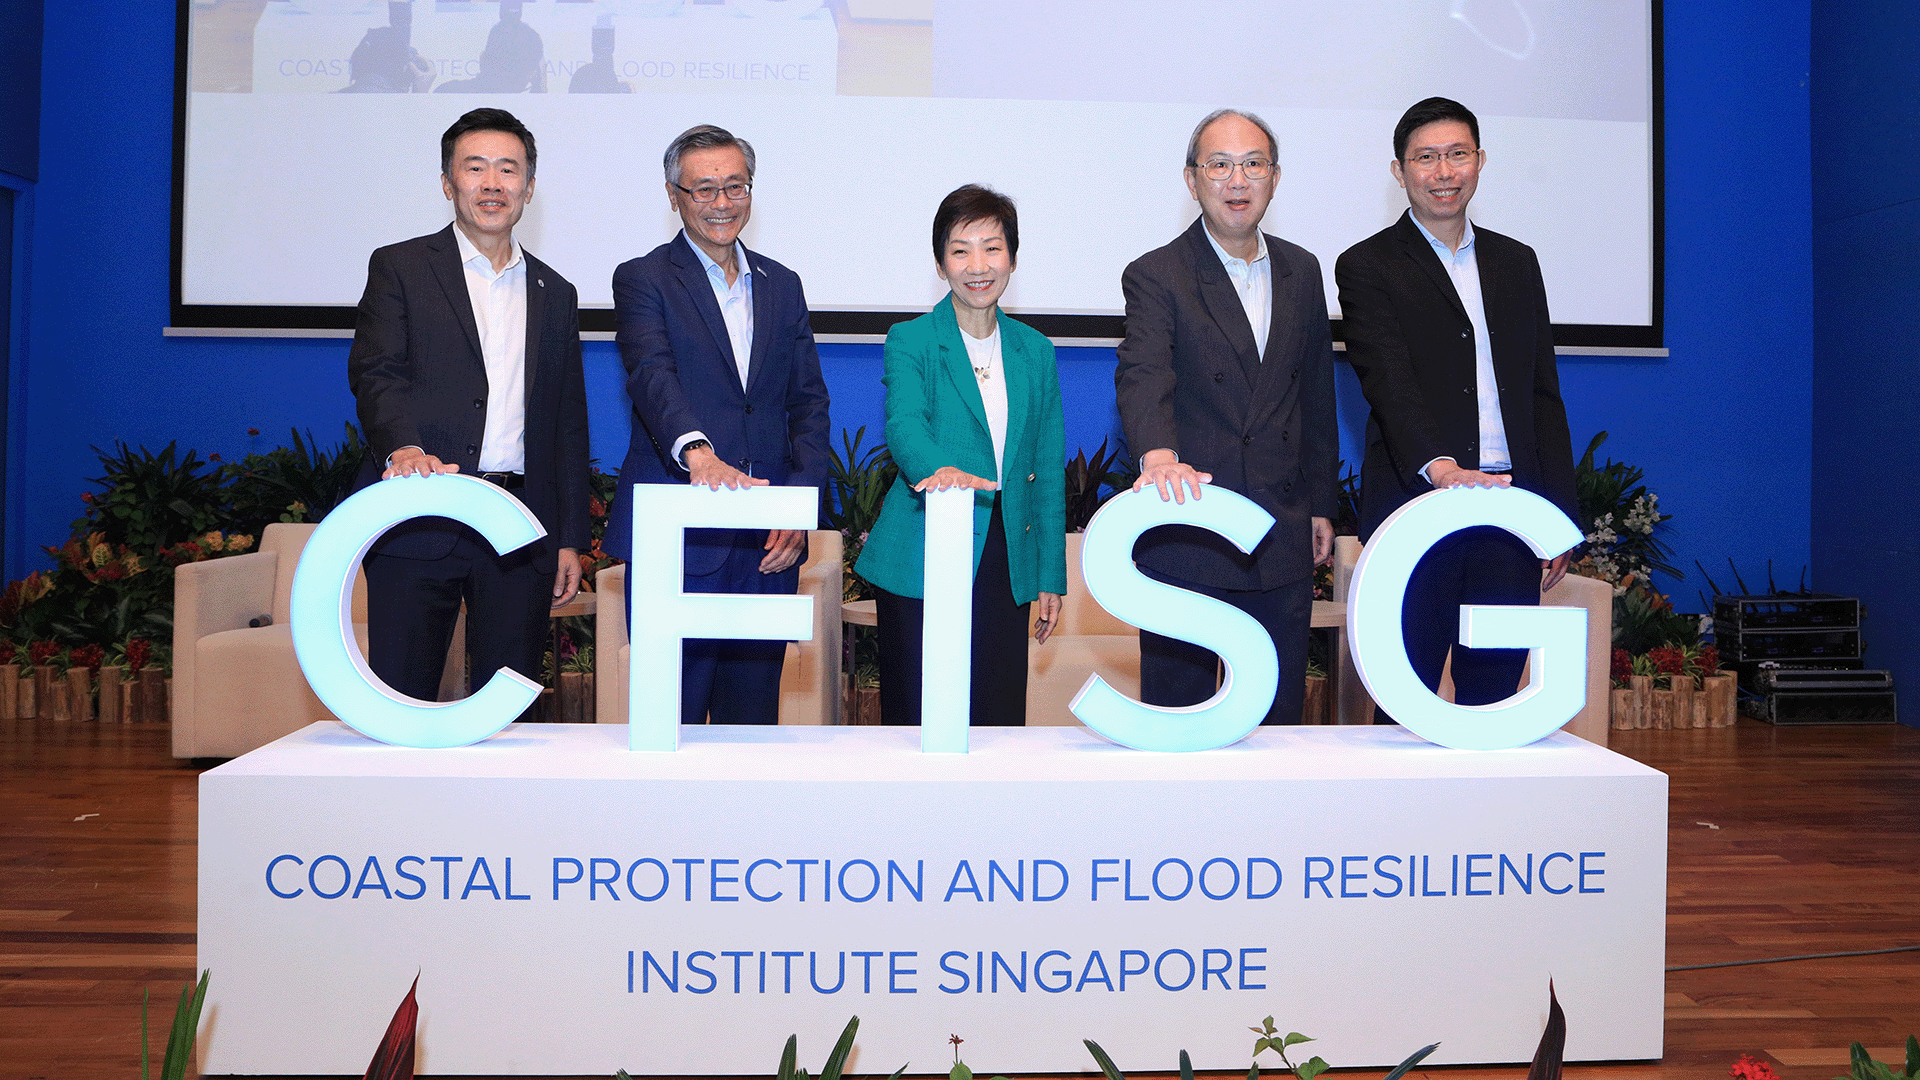 The formal launch of the new Centre of Excellence: left to right, Prof Richard Liew, Executive Director CFI Singapore; Professor Tan Eng Chye, NUS President; Grace Fu, Minister for Sustainability and the Environment; Chiang Chie Foo, Chairman PUB; Goh Si Hoi, Chief Executive PUB.